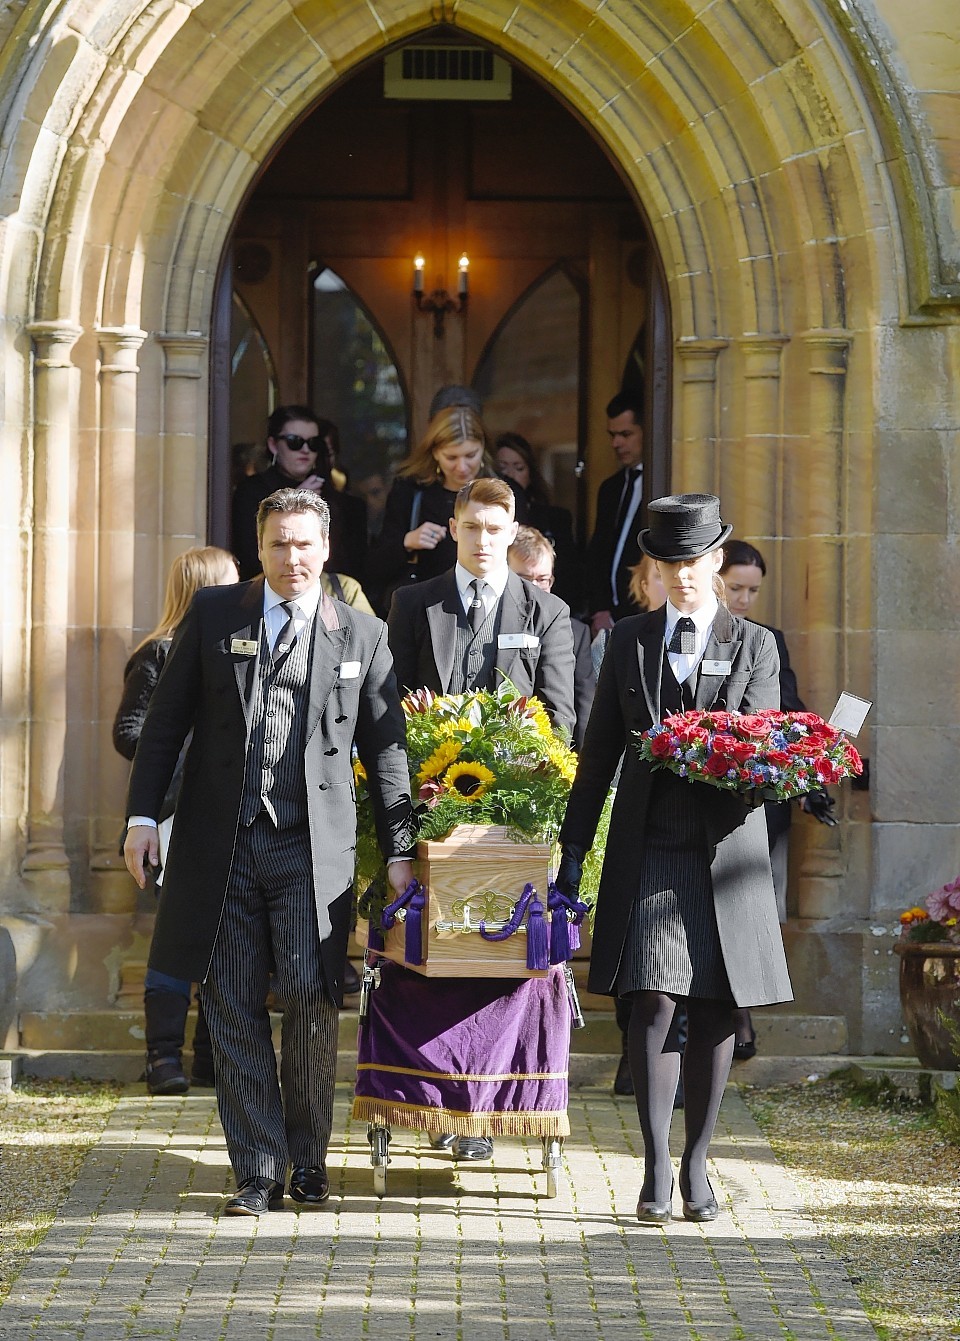 The funeral took place in Dornoch Cathedral